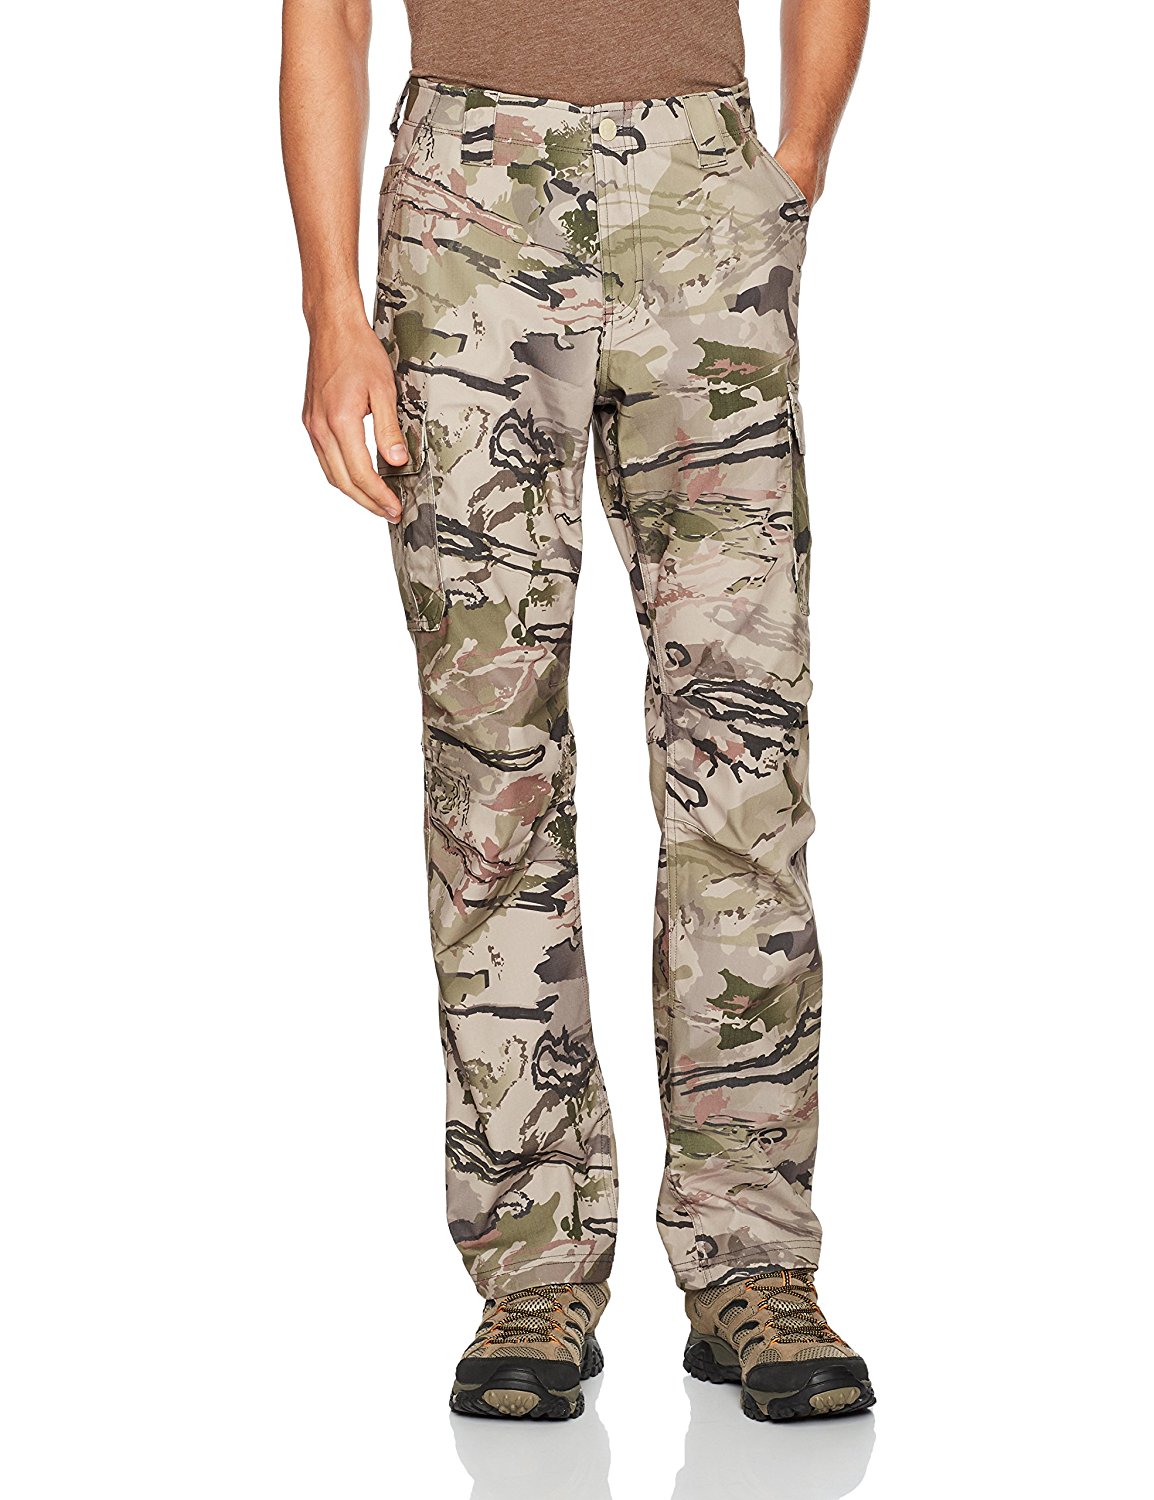 under armour heat gear hunting pants